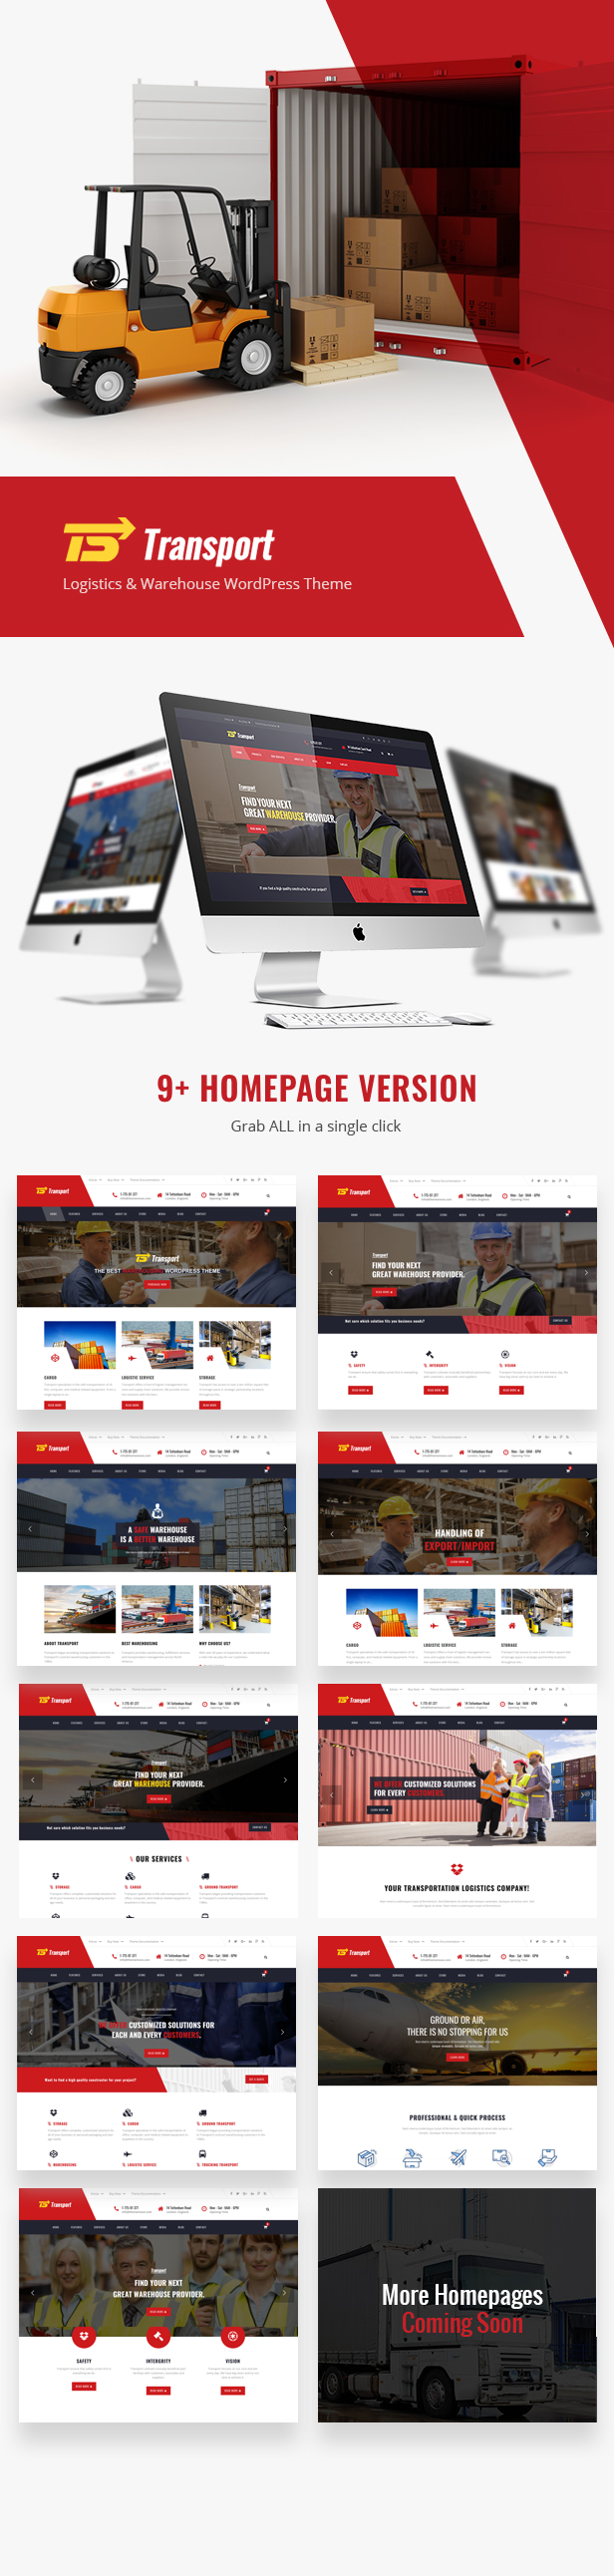 Transport Logistic and Warehouse WordPress Theme - 9 Homepages